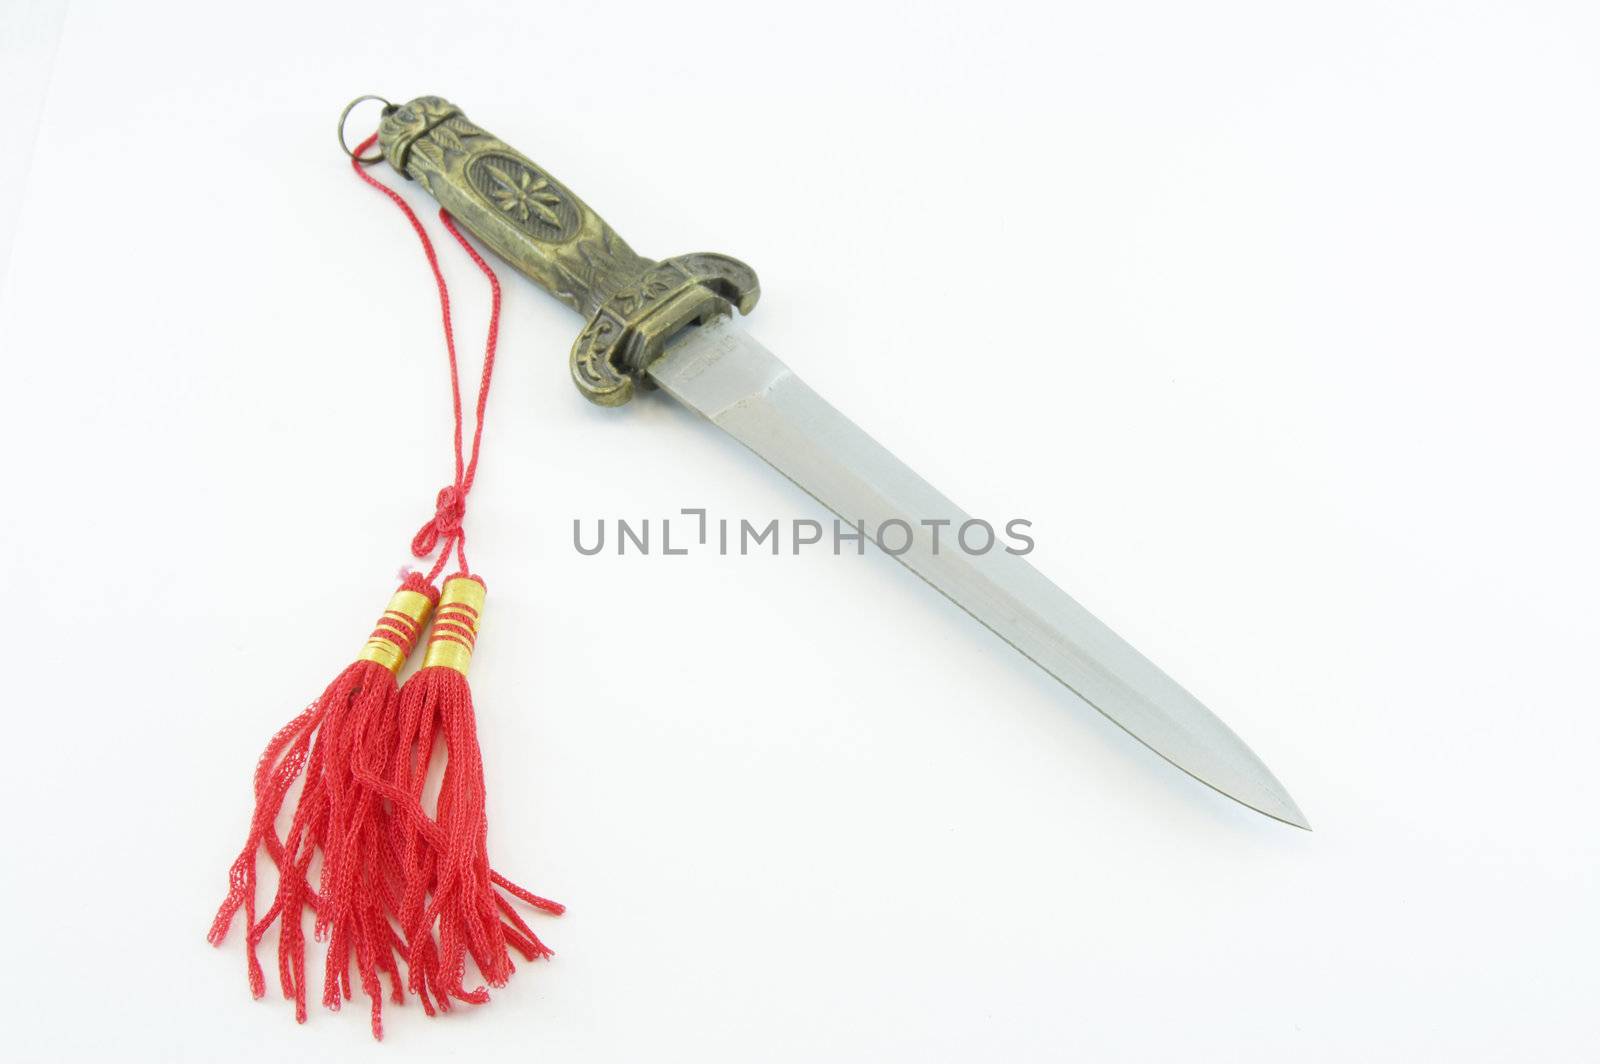 The Chinese dagger with a red brush